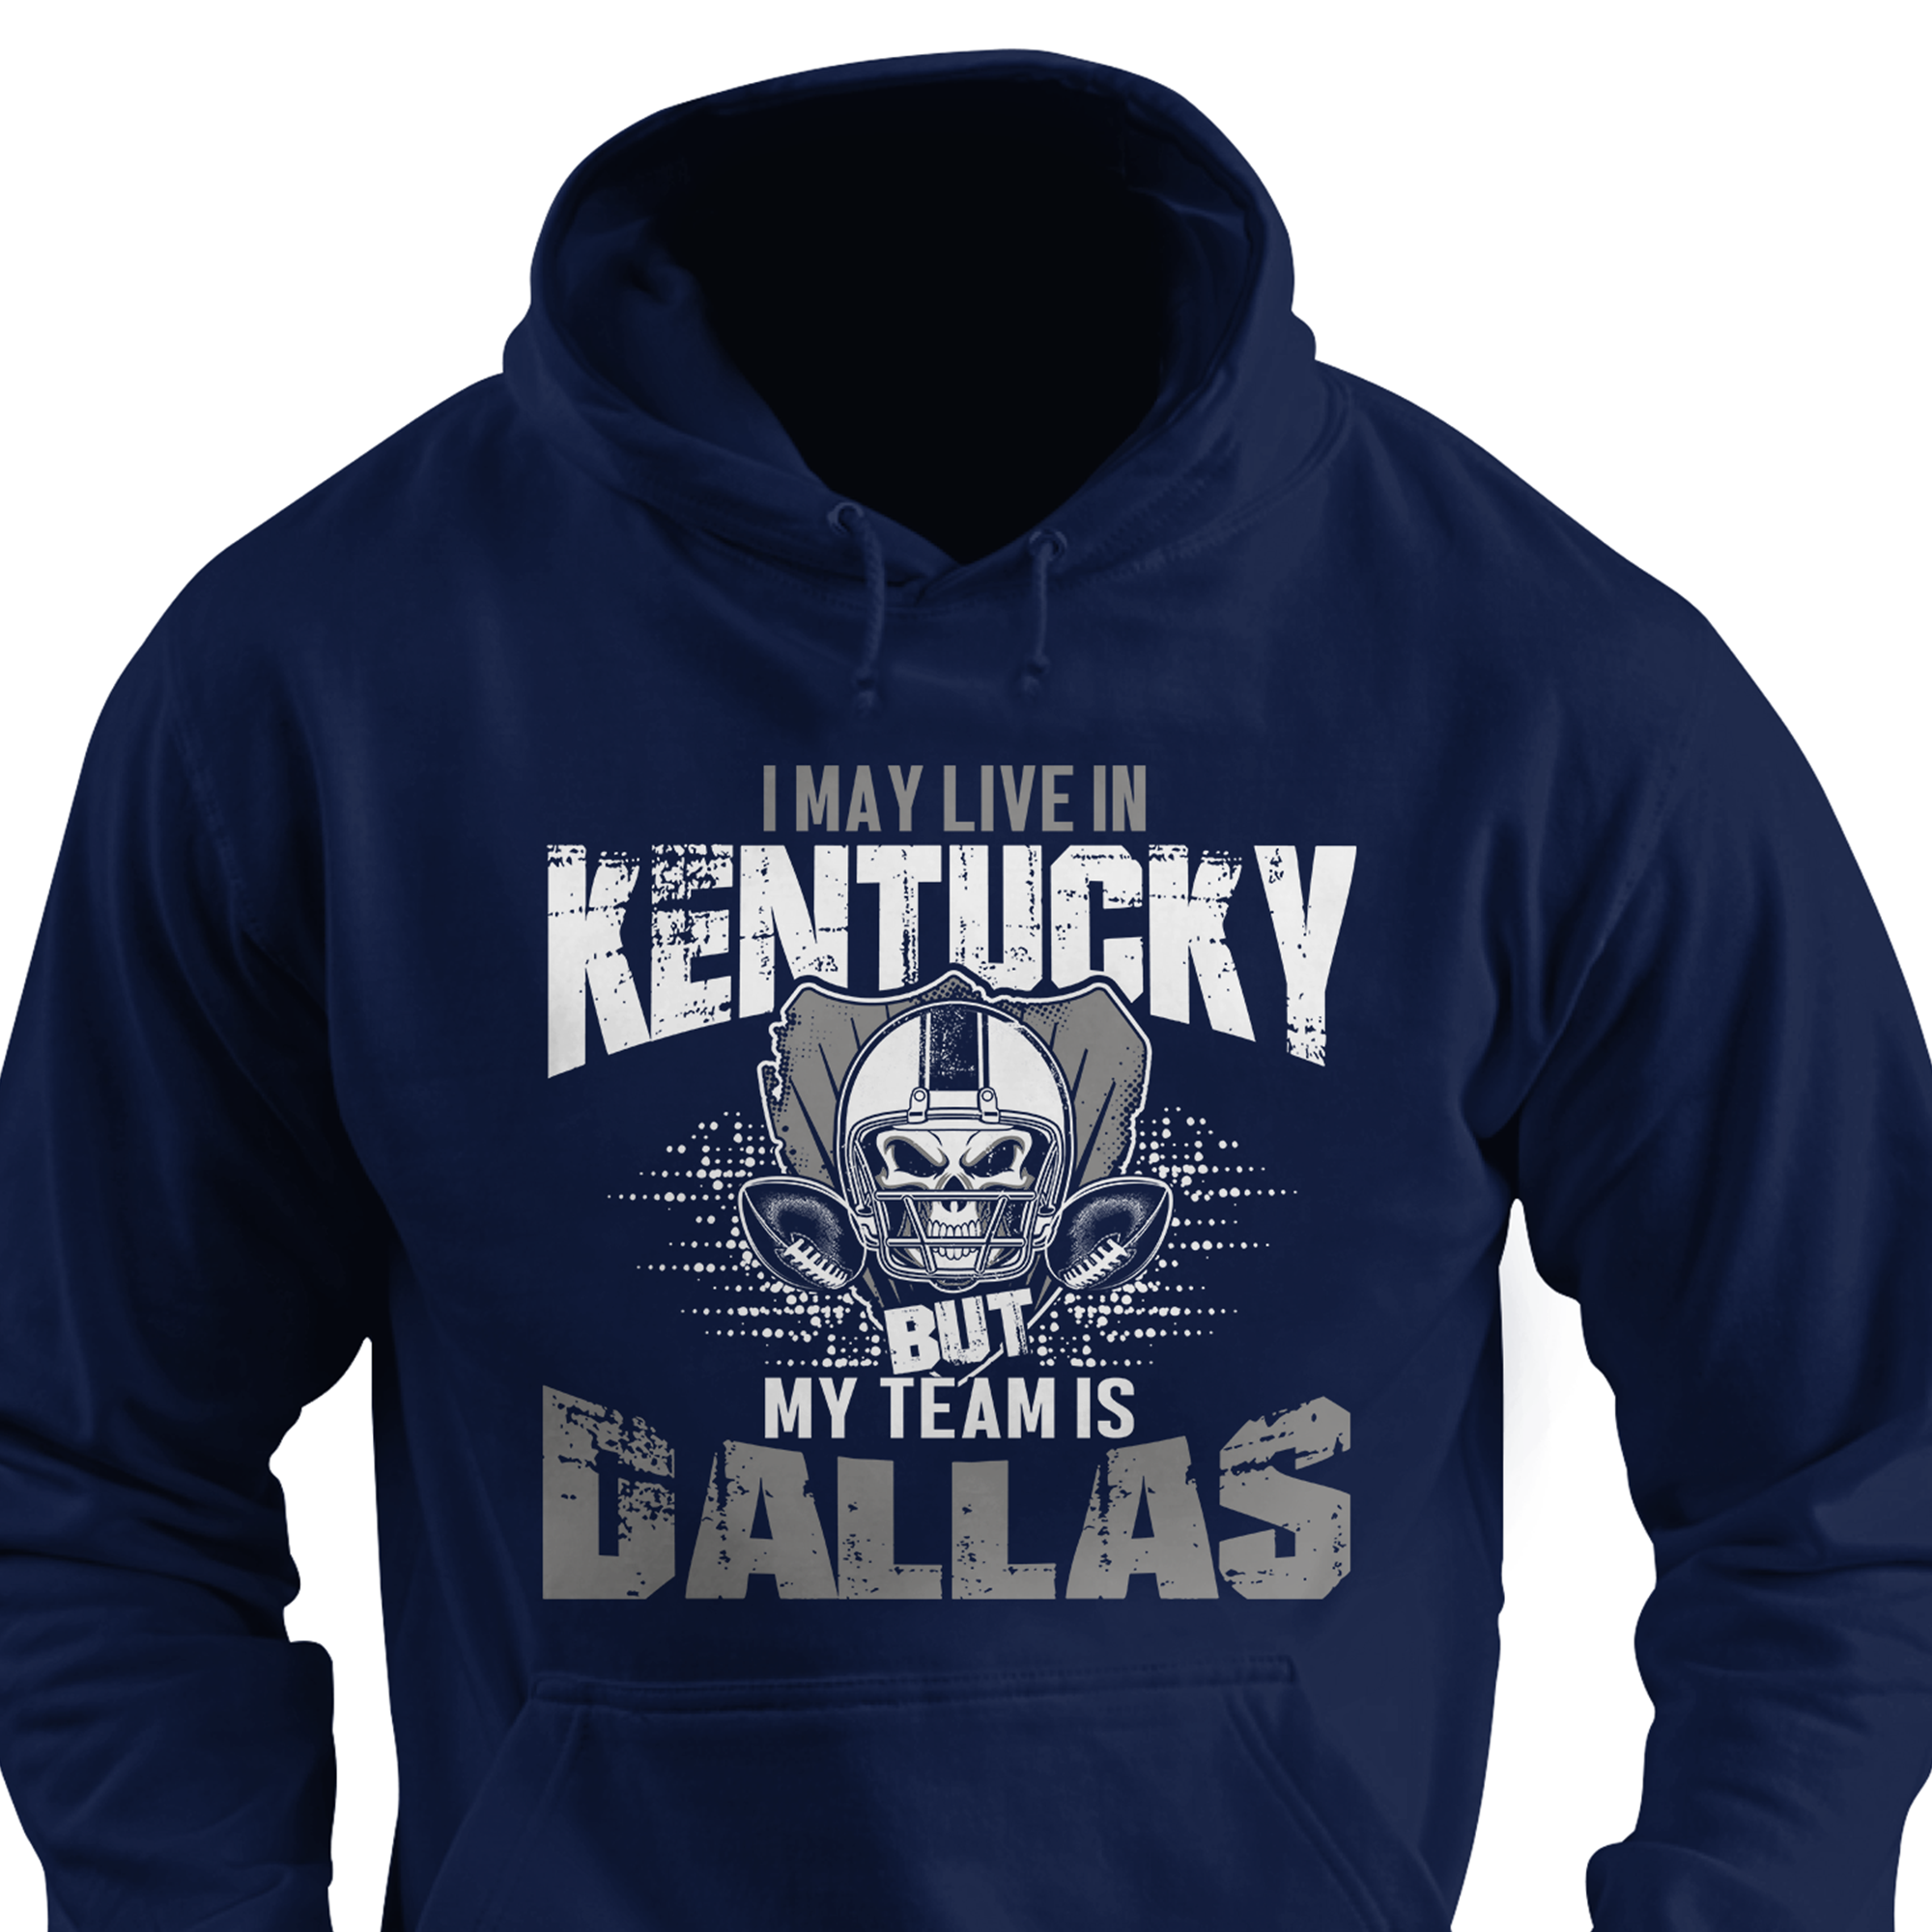 I may live in Kentucky but my team is Dallas